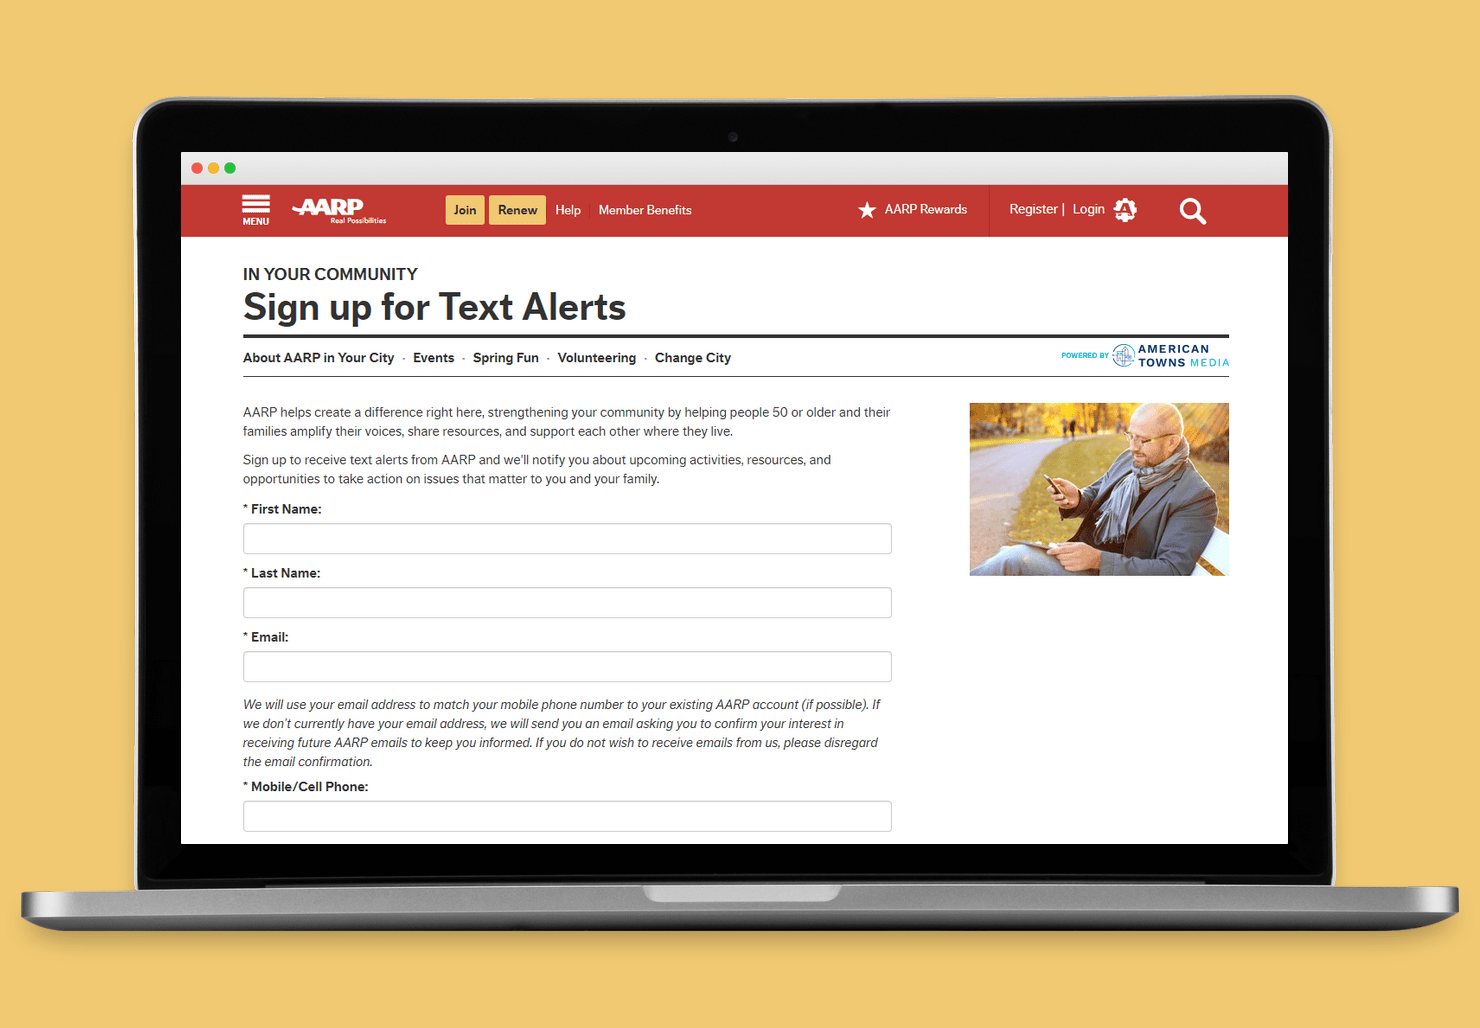 AARP Advertising SMS Marketing Campaign on Website